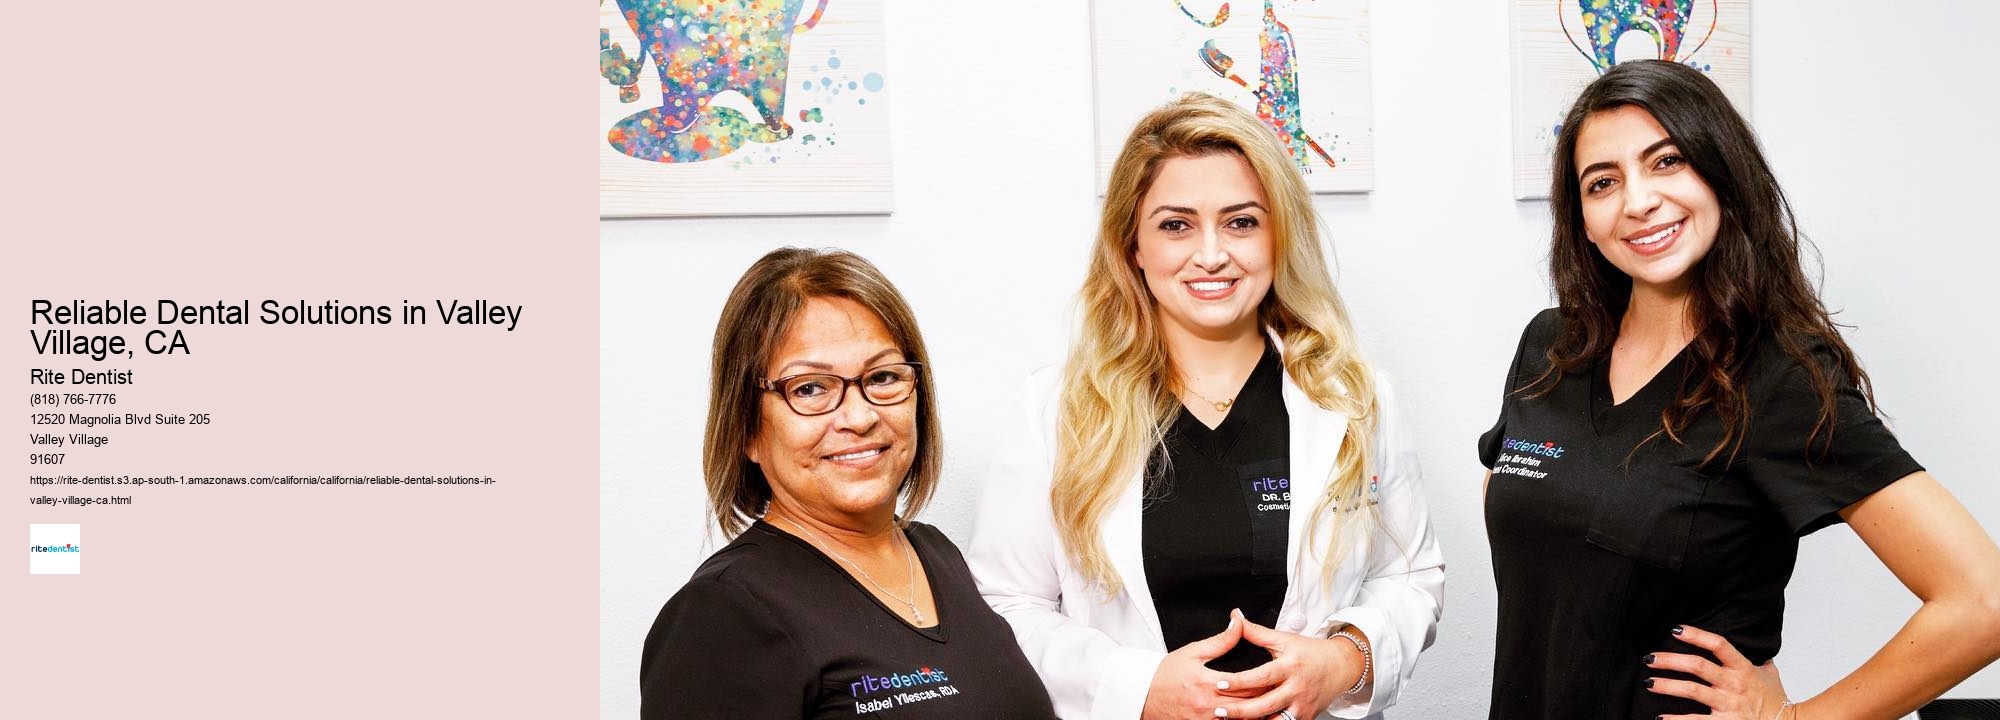 Reliable Dental Solutions in Valley Village, CA